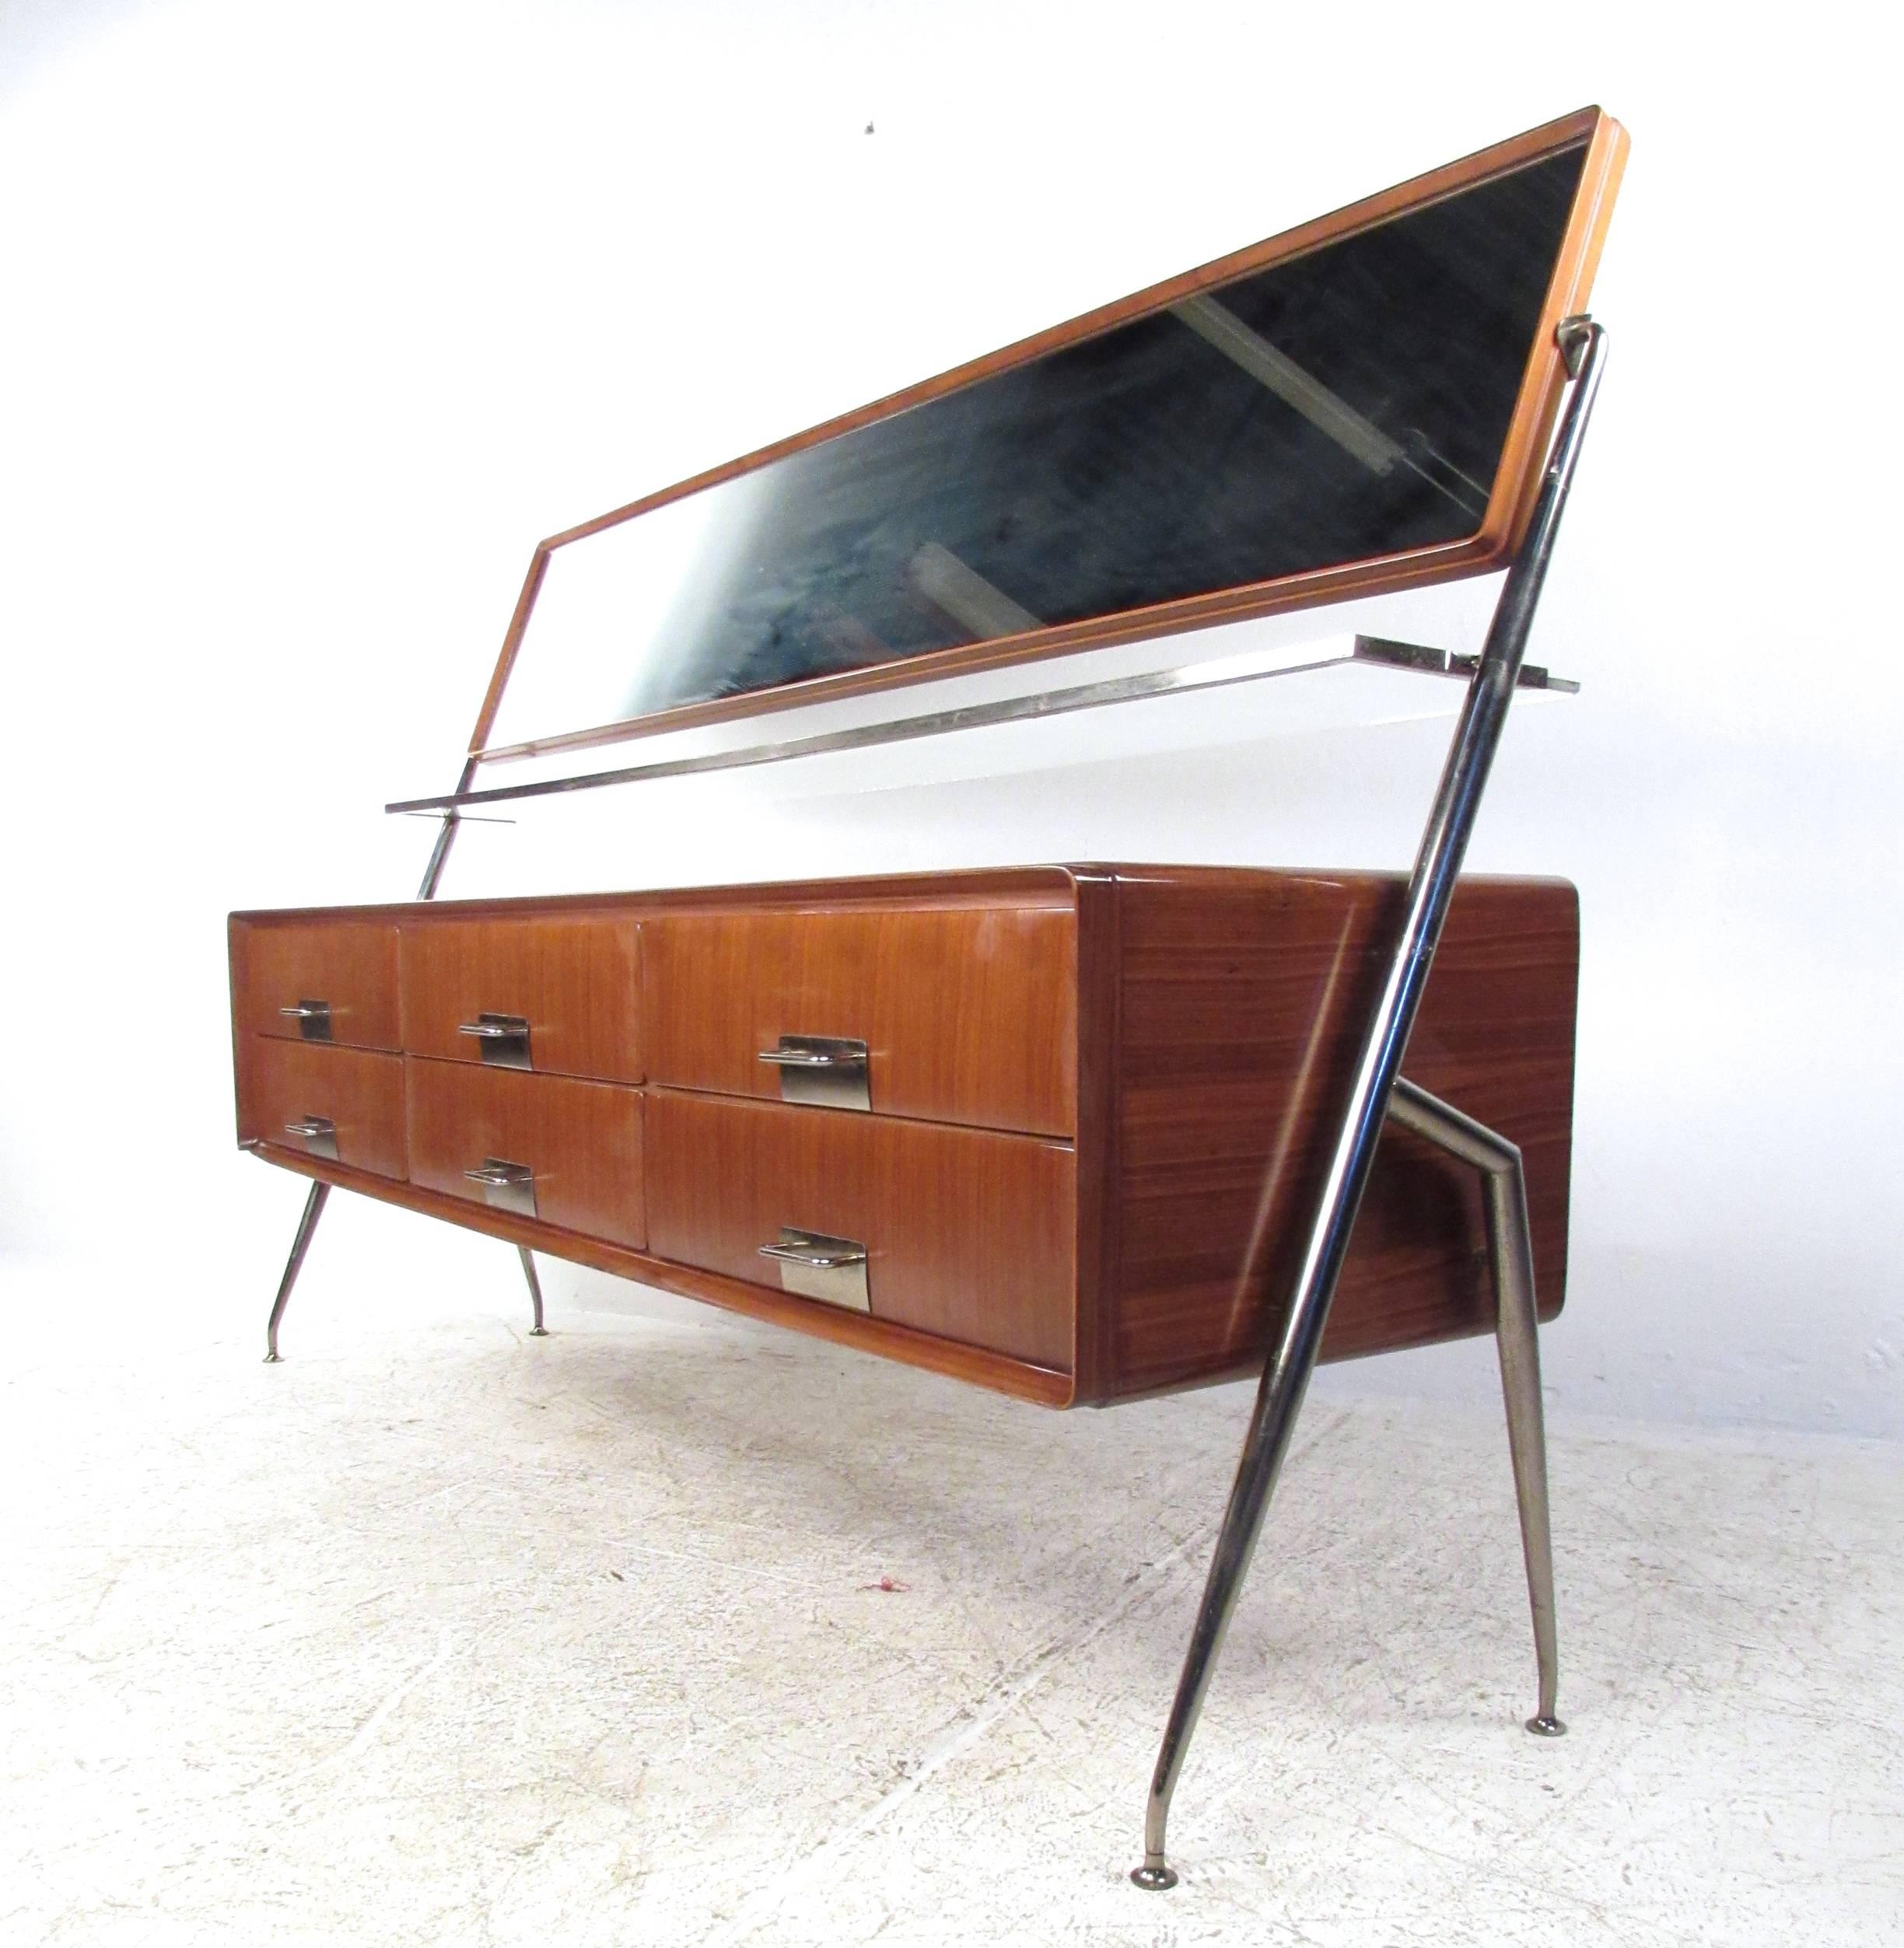 This stunning vintage dresser features a stylish mis of wood, glass, and metal. Tapered geometric frame, beautiful vintage finish, and adjustable vanity mirror set this piece apart from other Mid-Century selections. Definitive Italian design makes